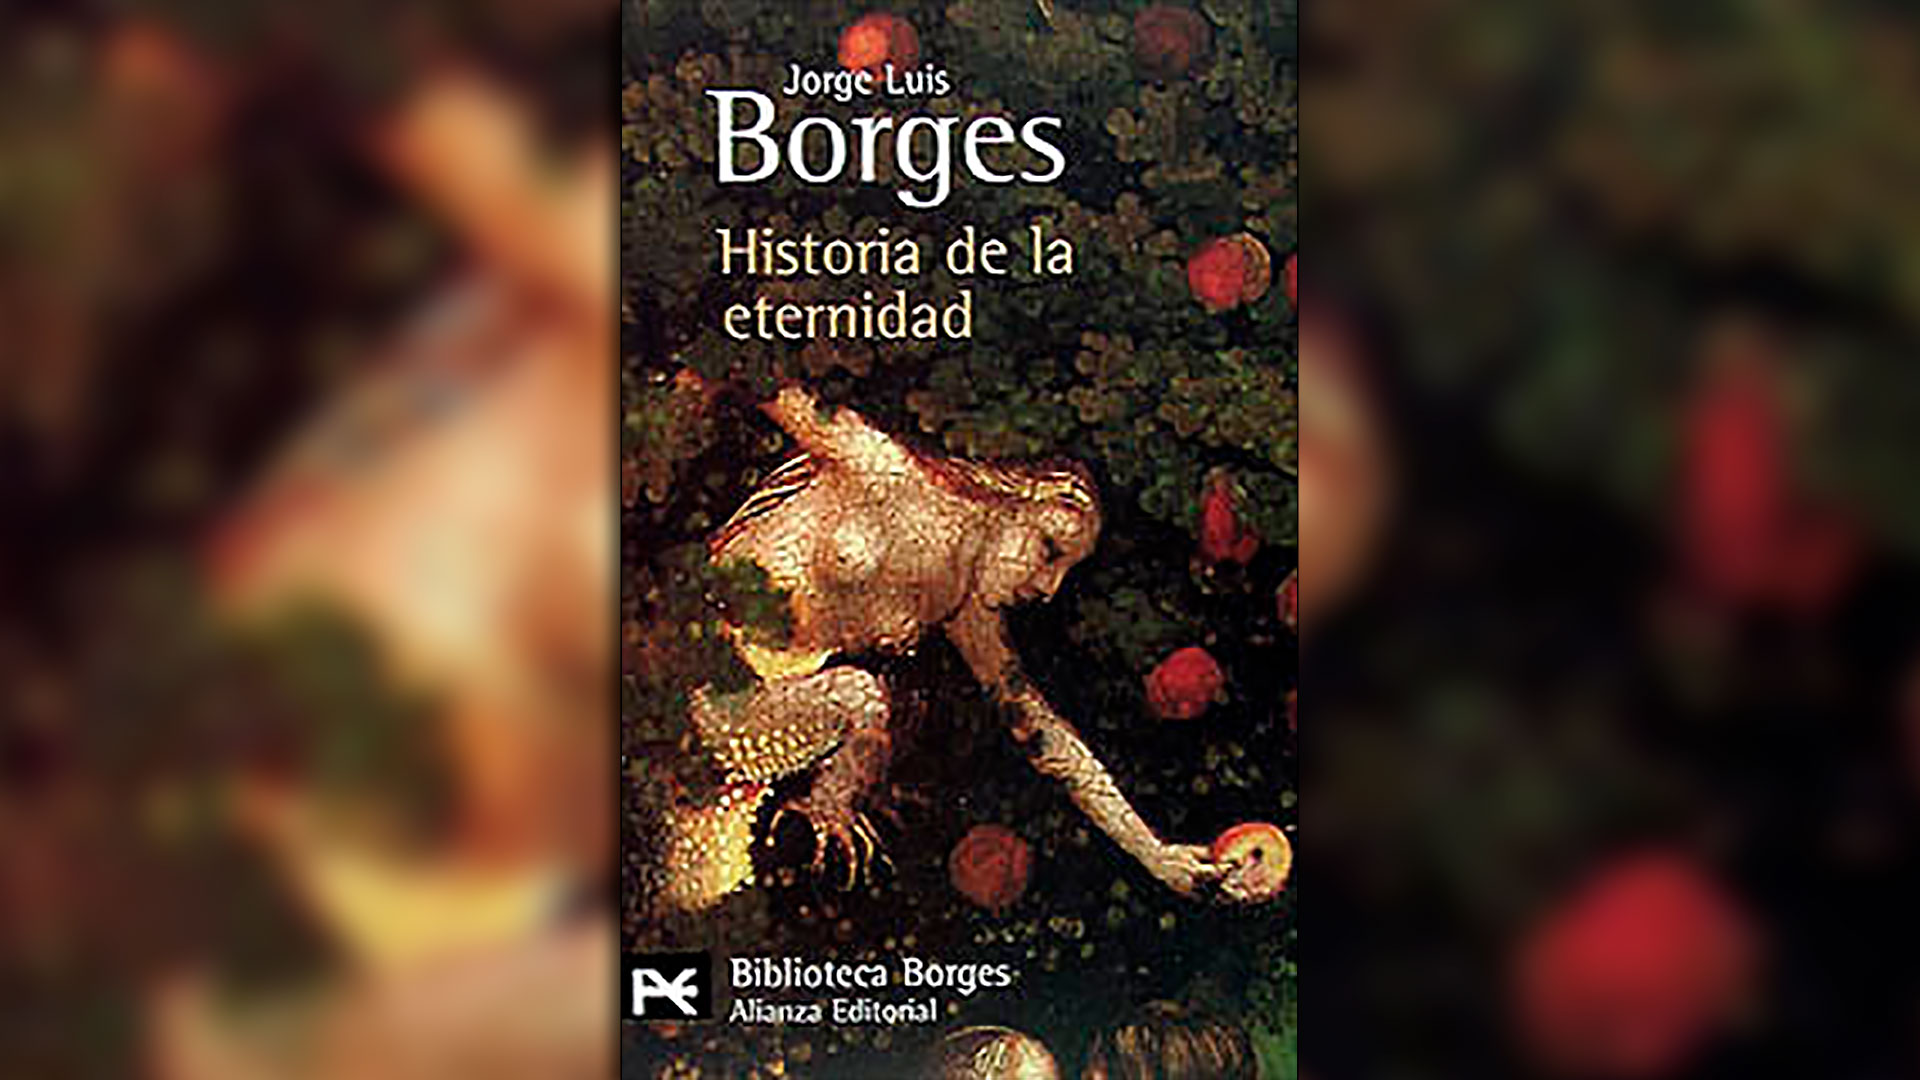 Five Borges pounds for only 250 Argentine pesos: offer ends tomorrow